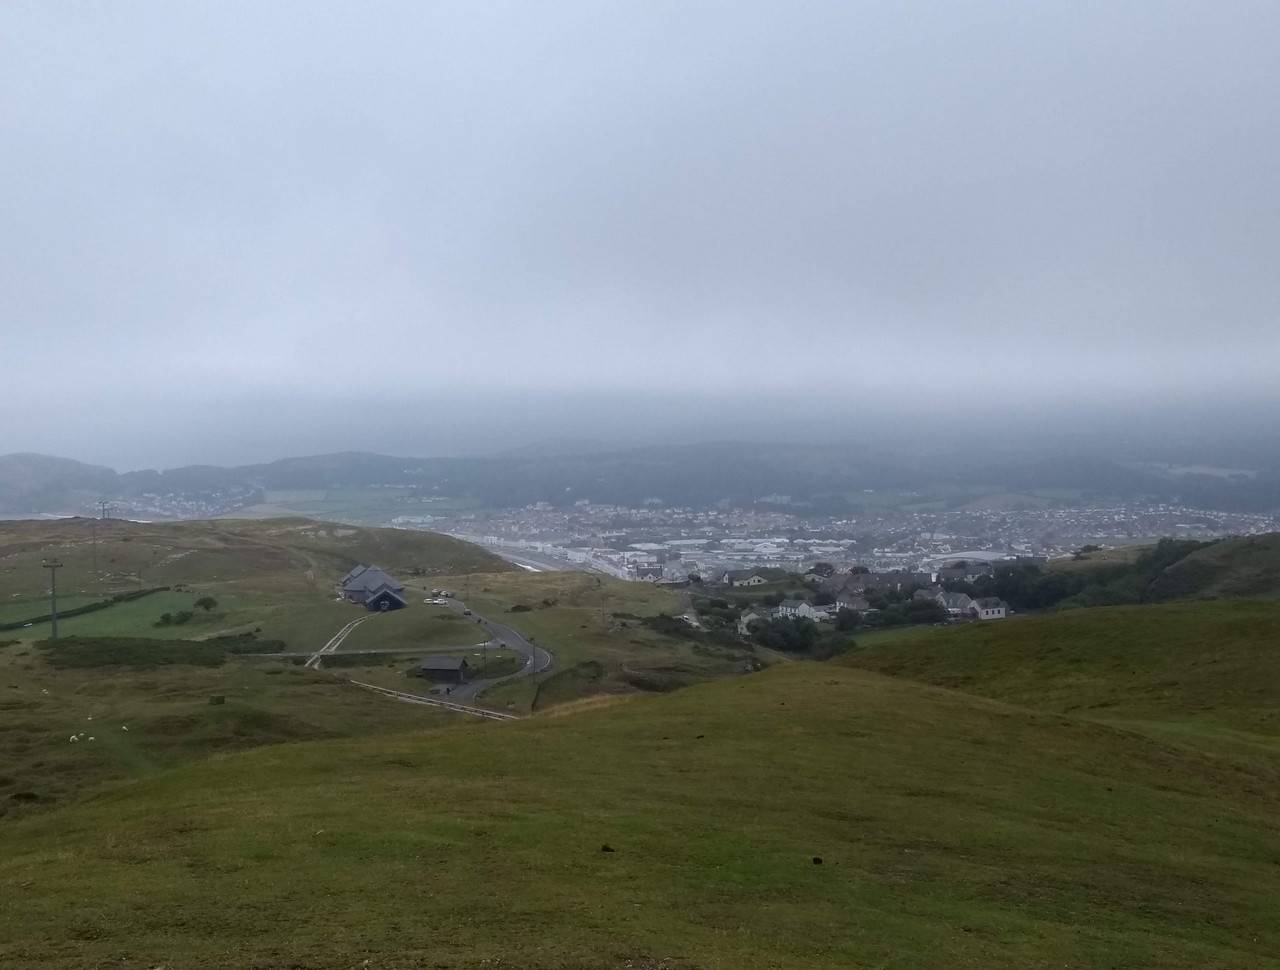 Fossil hunting: Llandudno and the Great Orme